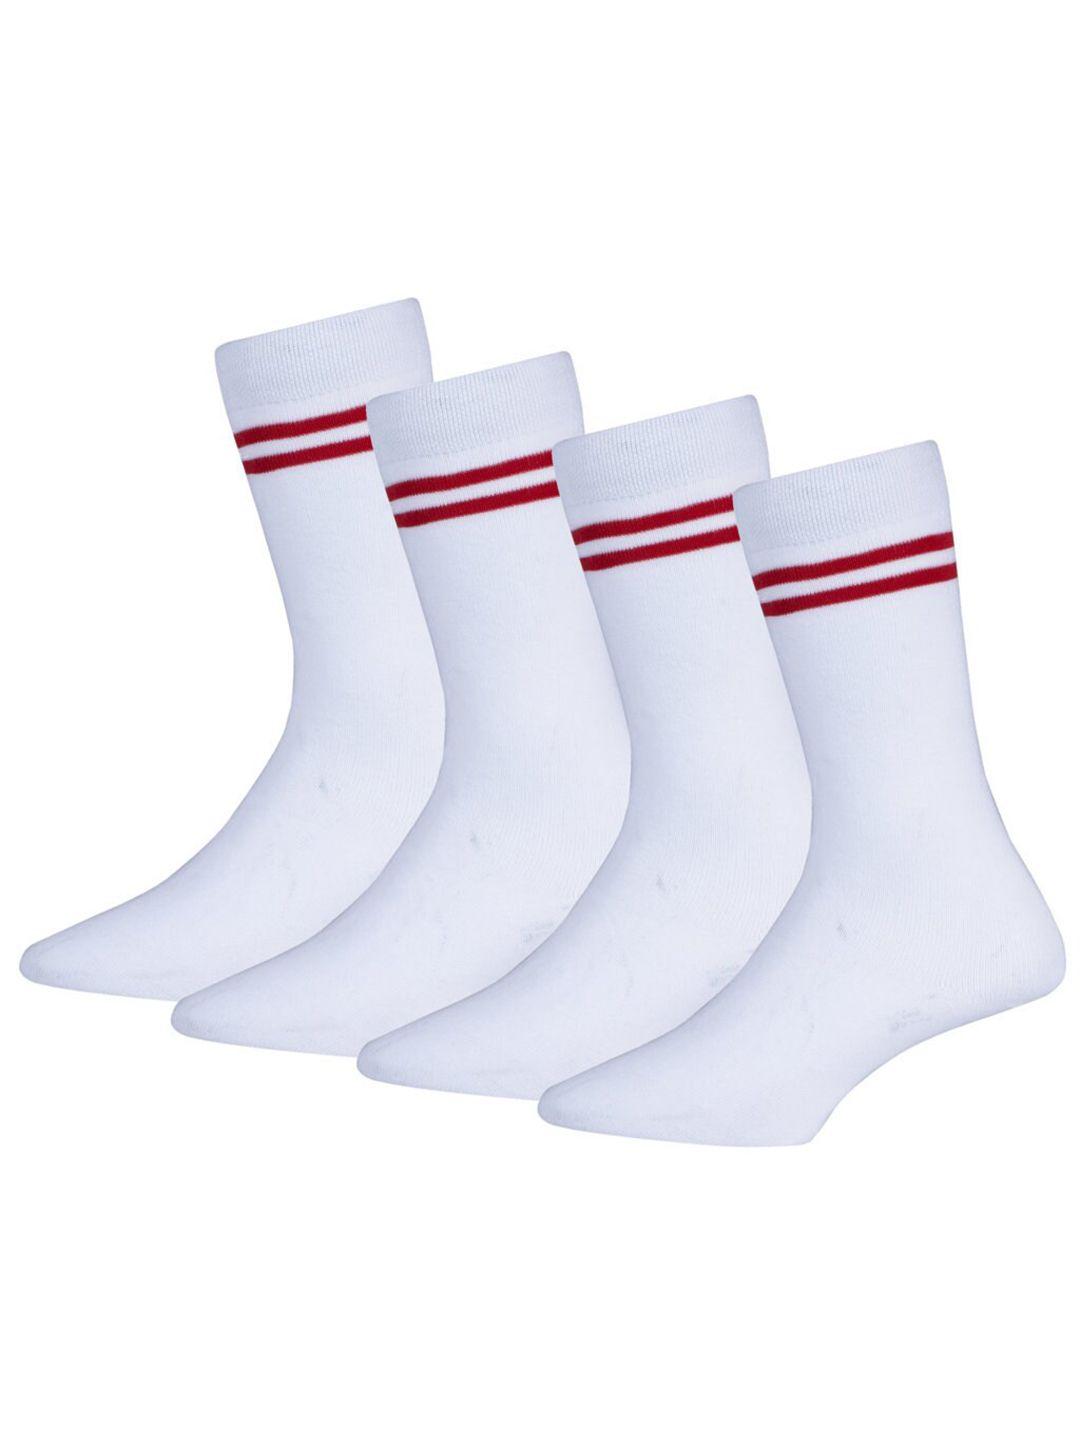 rc. royal class kids pack of 4 white solid calf length cotton socks